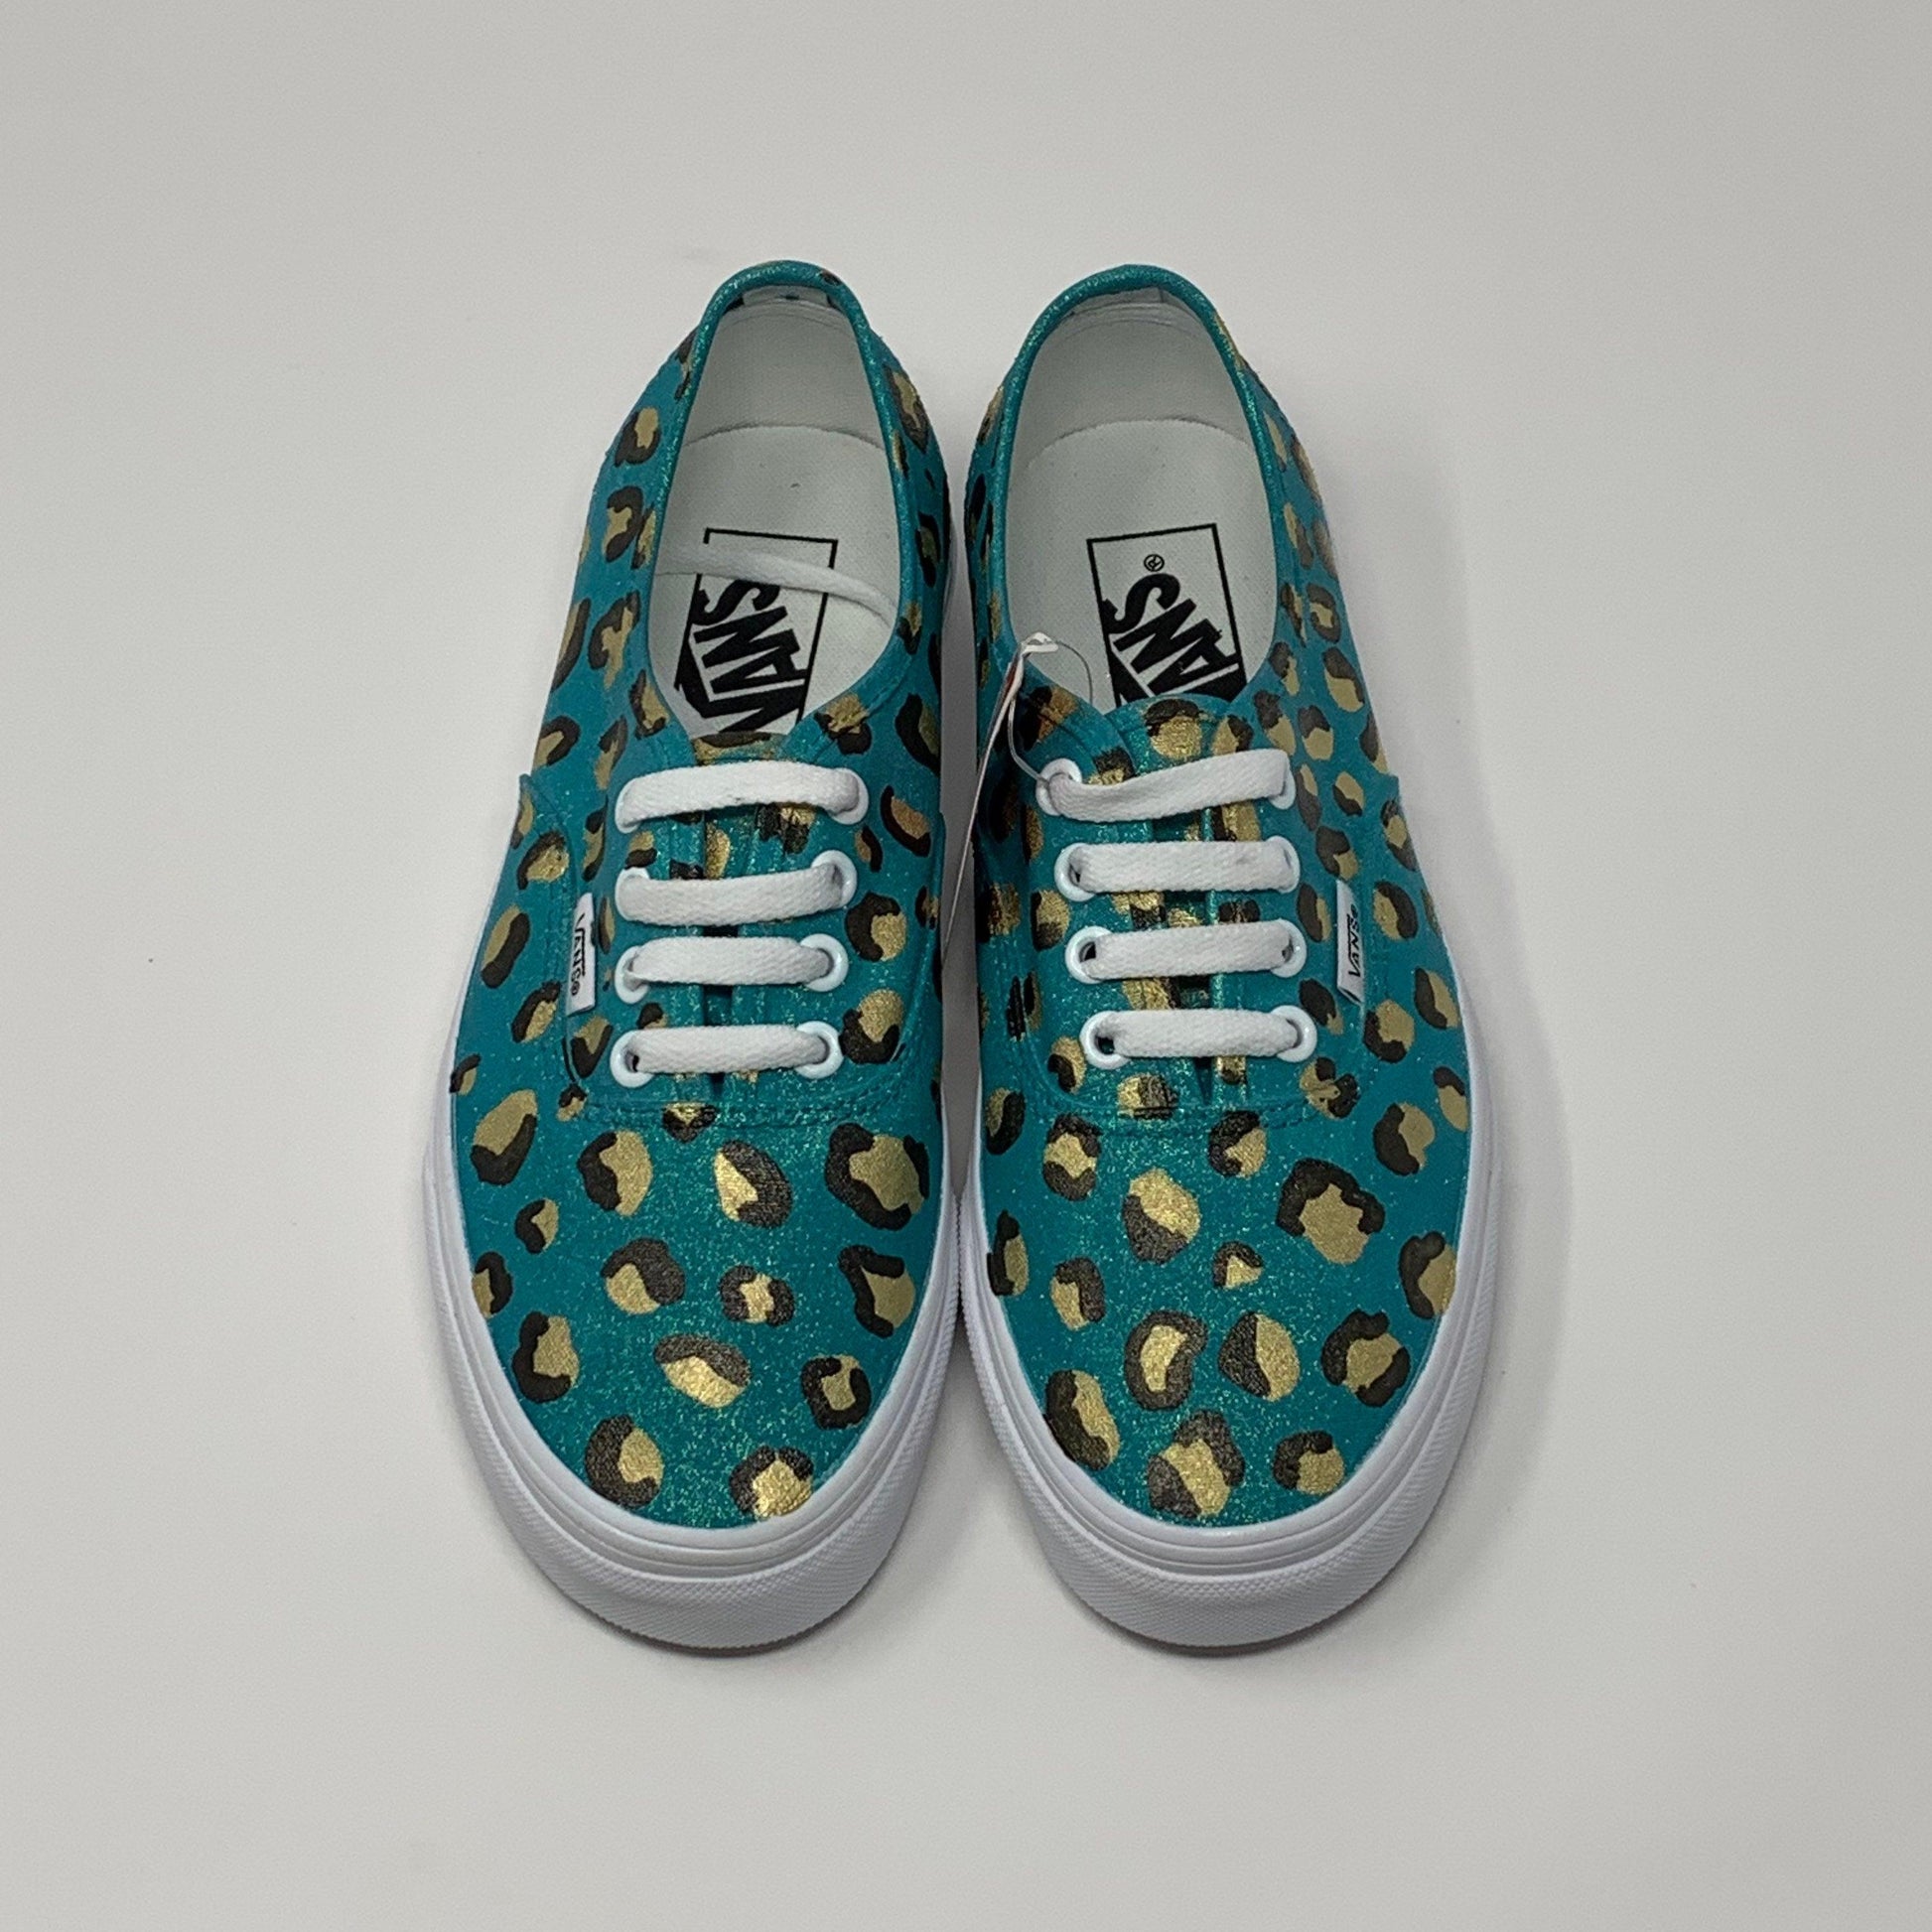 Teal & Gold Leopard Print Shoes